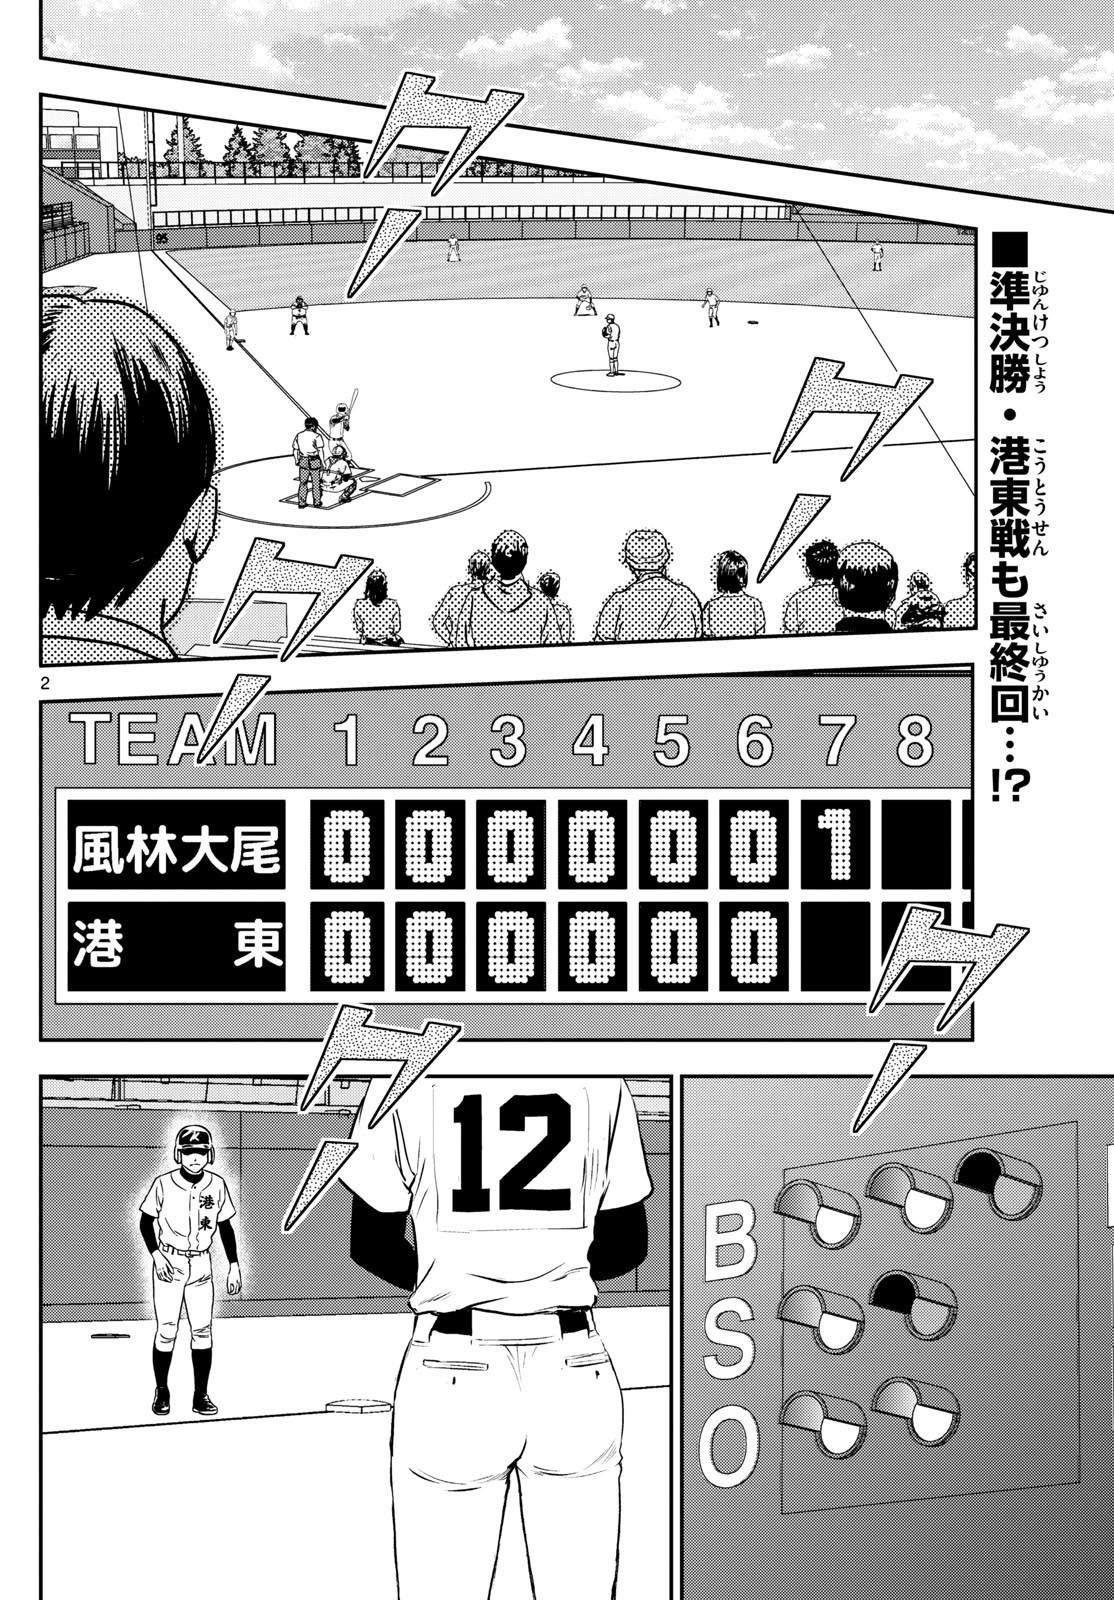 Major 2nd - メジャーセカンド - Chapter 283 - Page 2